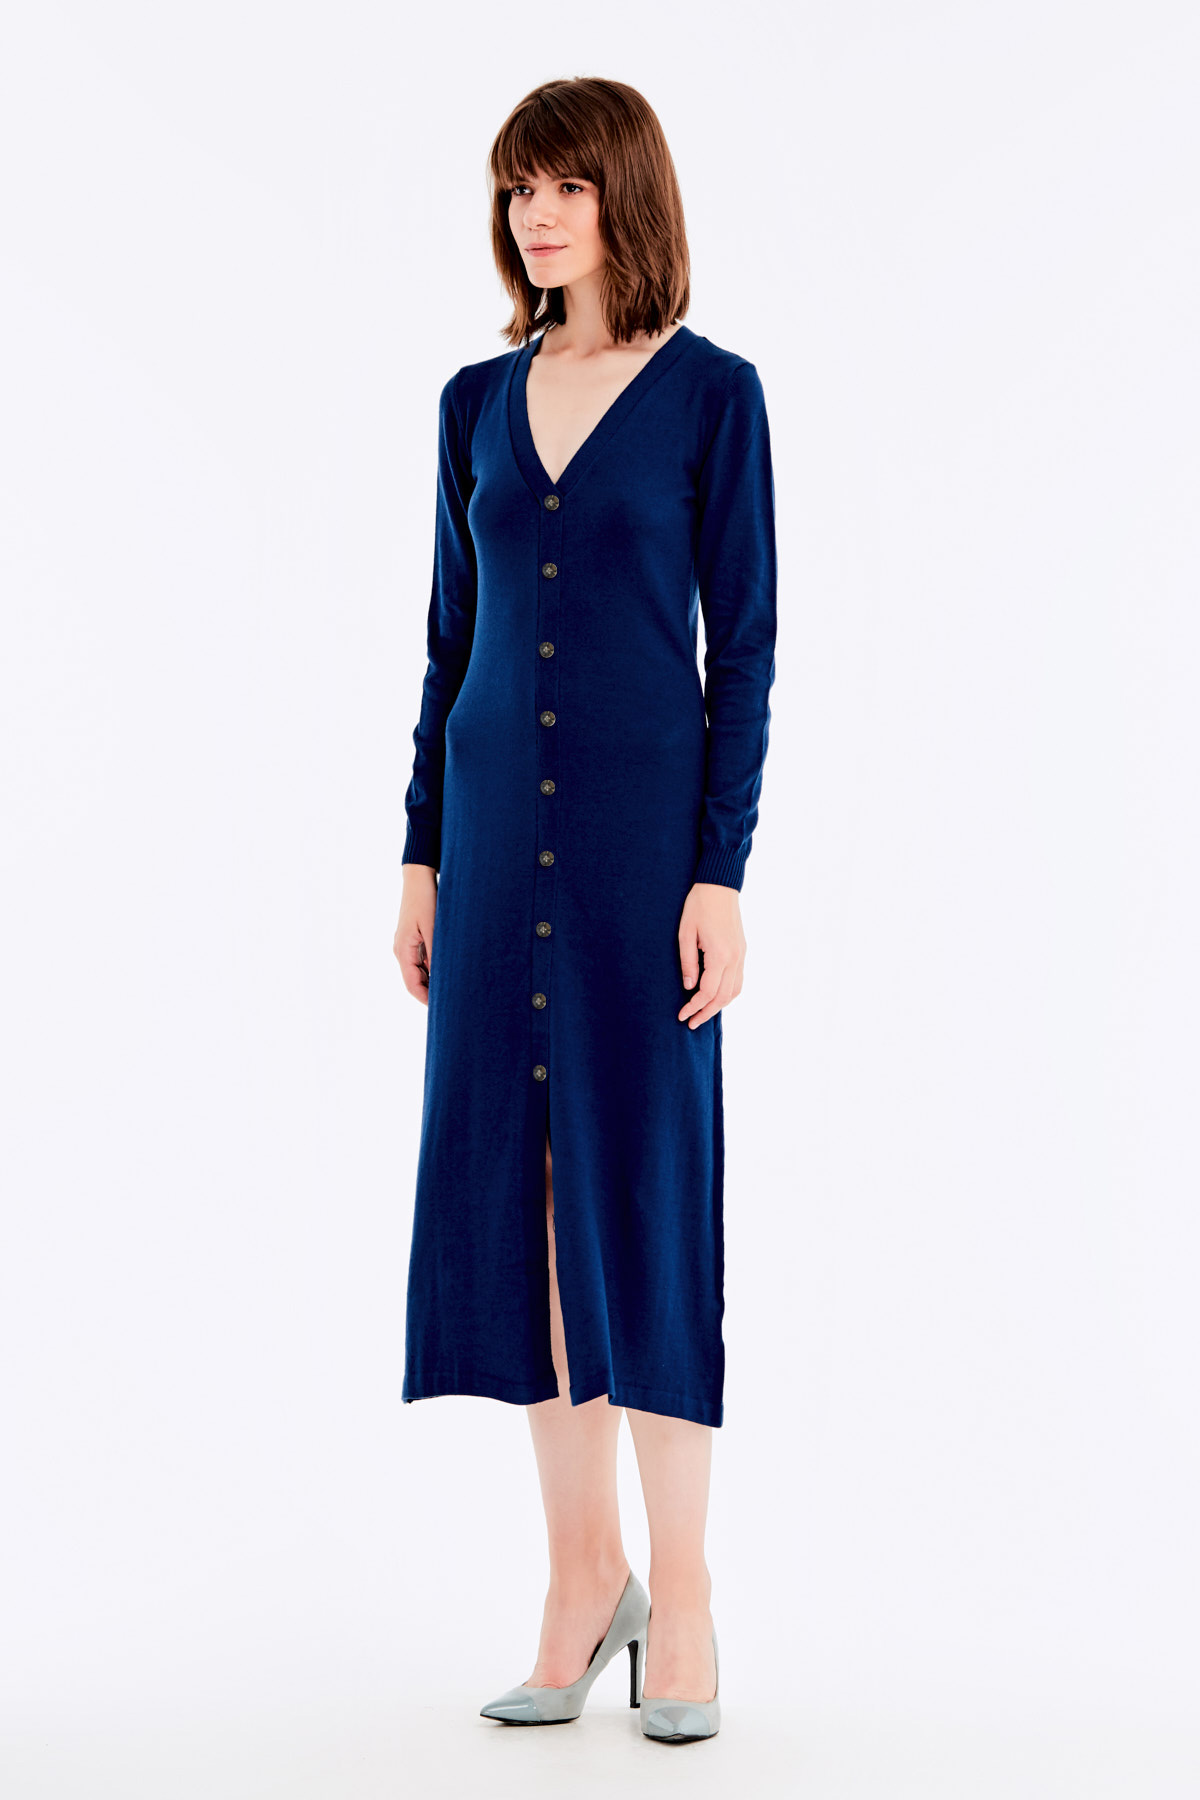 Blue knit dress with buttons, photo 4